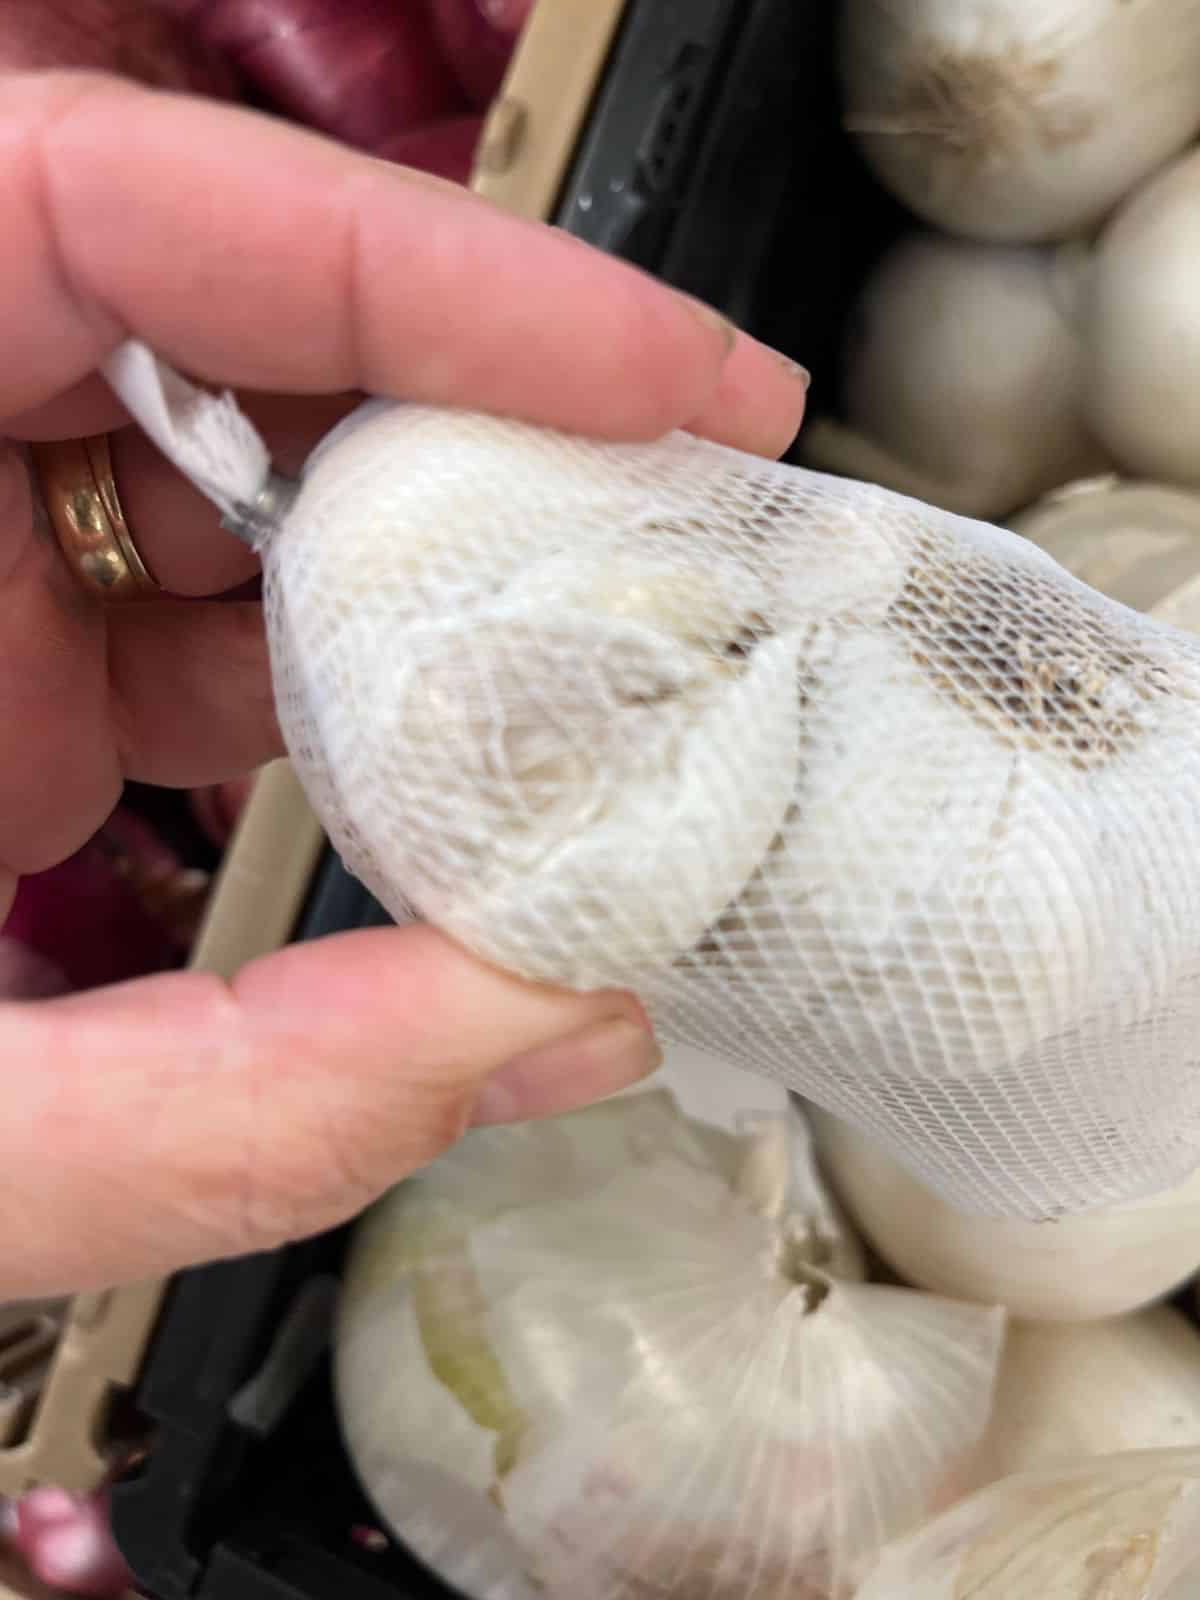 Dried out old garlic in a grocery store